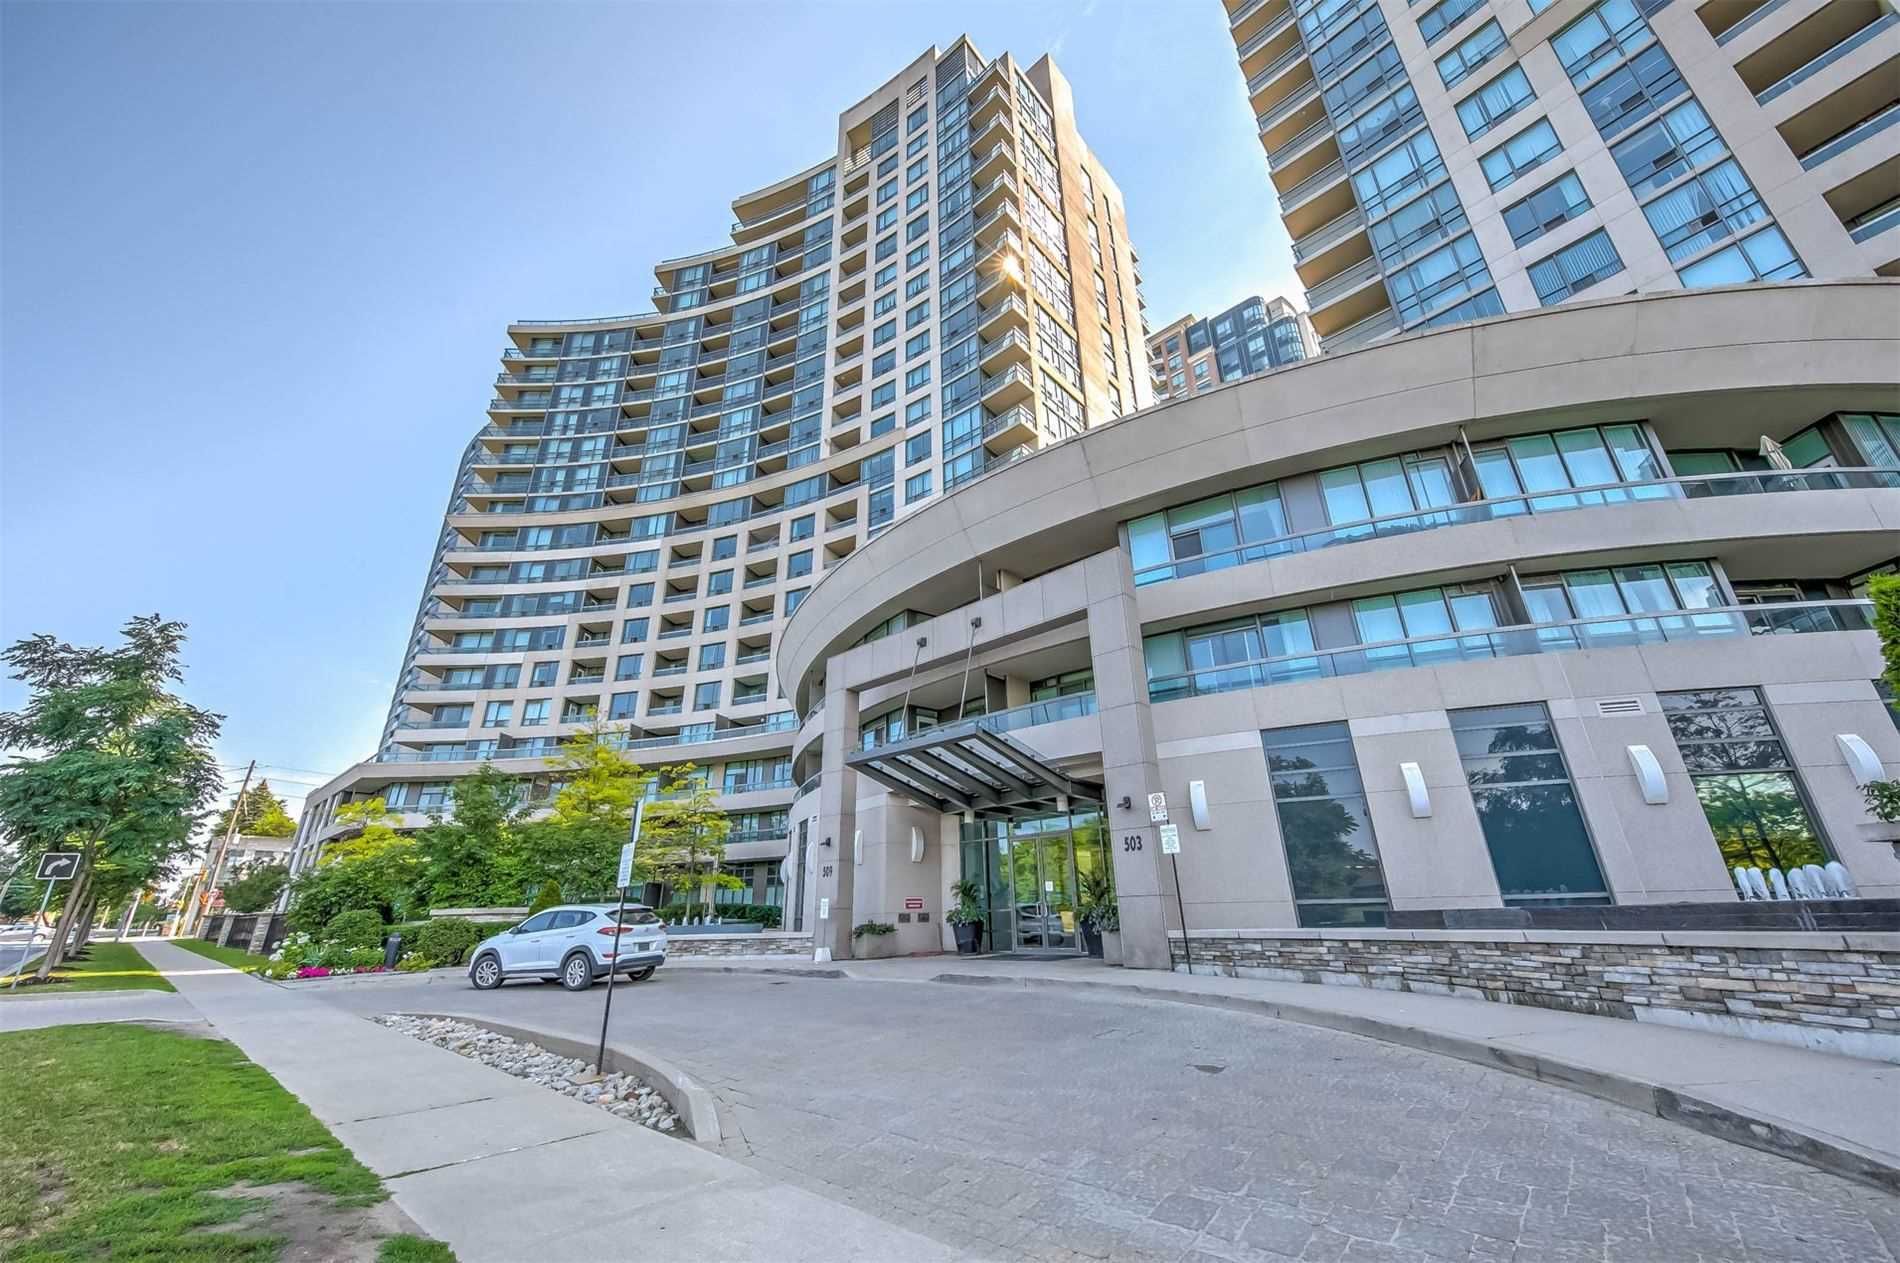 509 Beecroft Rd. This condo at The Continental Condos is located in  North York, Toronto - image #2 of 2 by Strata.ca